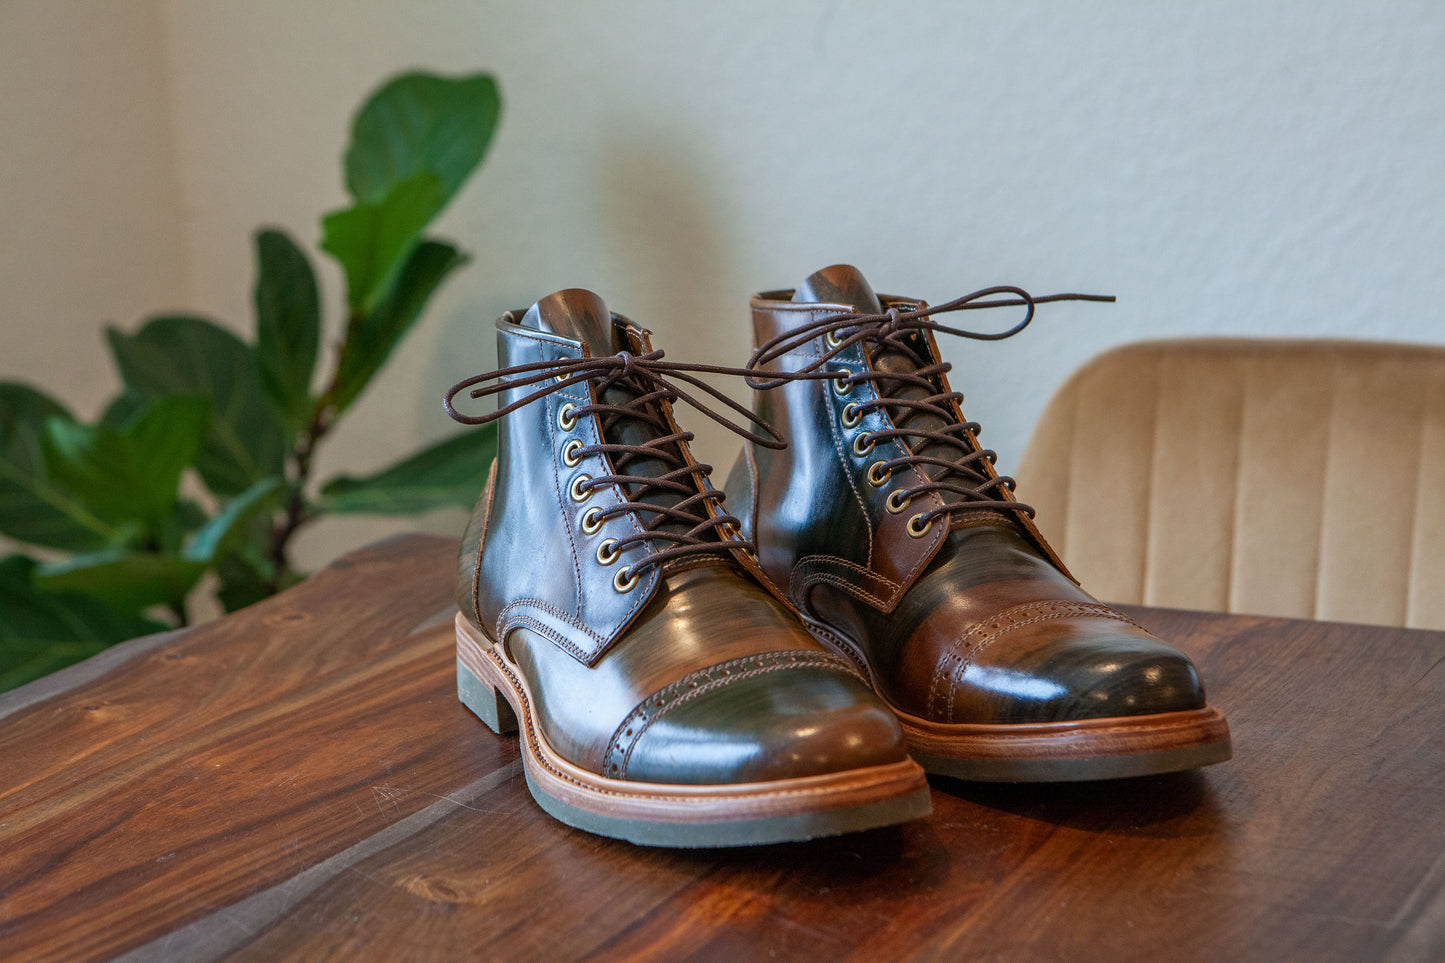 Pigeon Tree X Santalum Collab No. 4 - The Hand Marbled Green Vegetable Tanned Boot